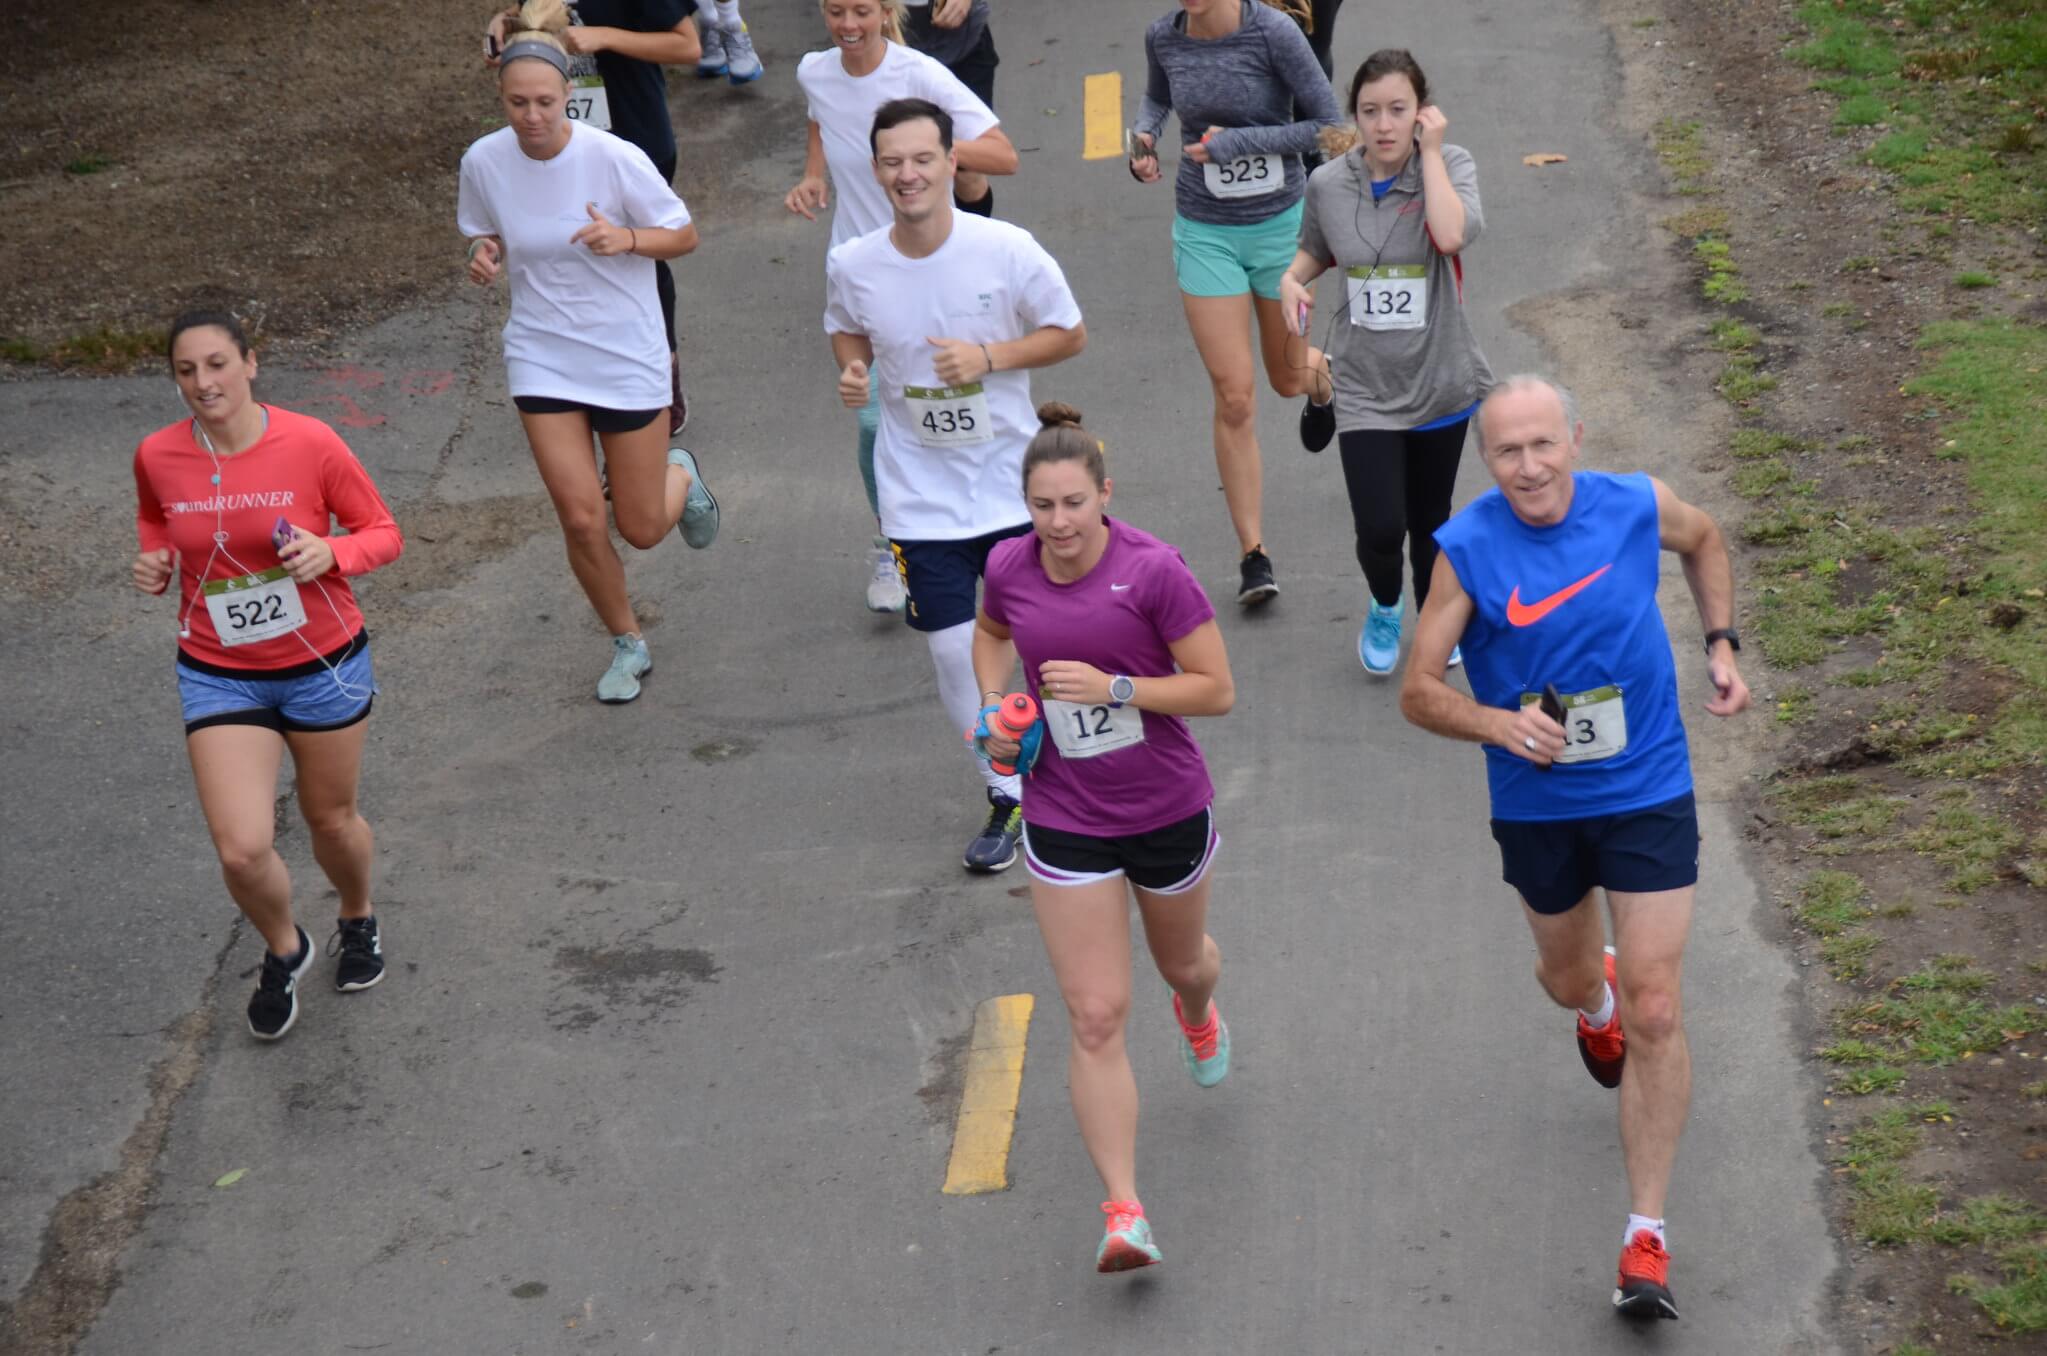 Group of people running during 5k